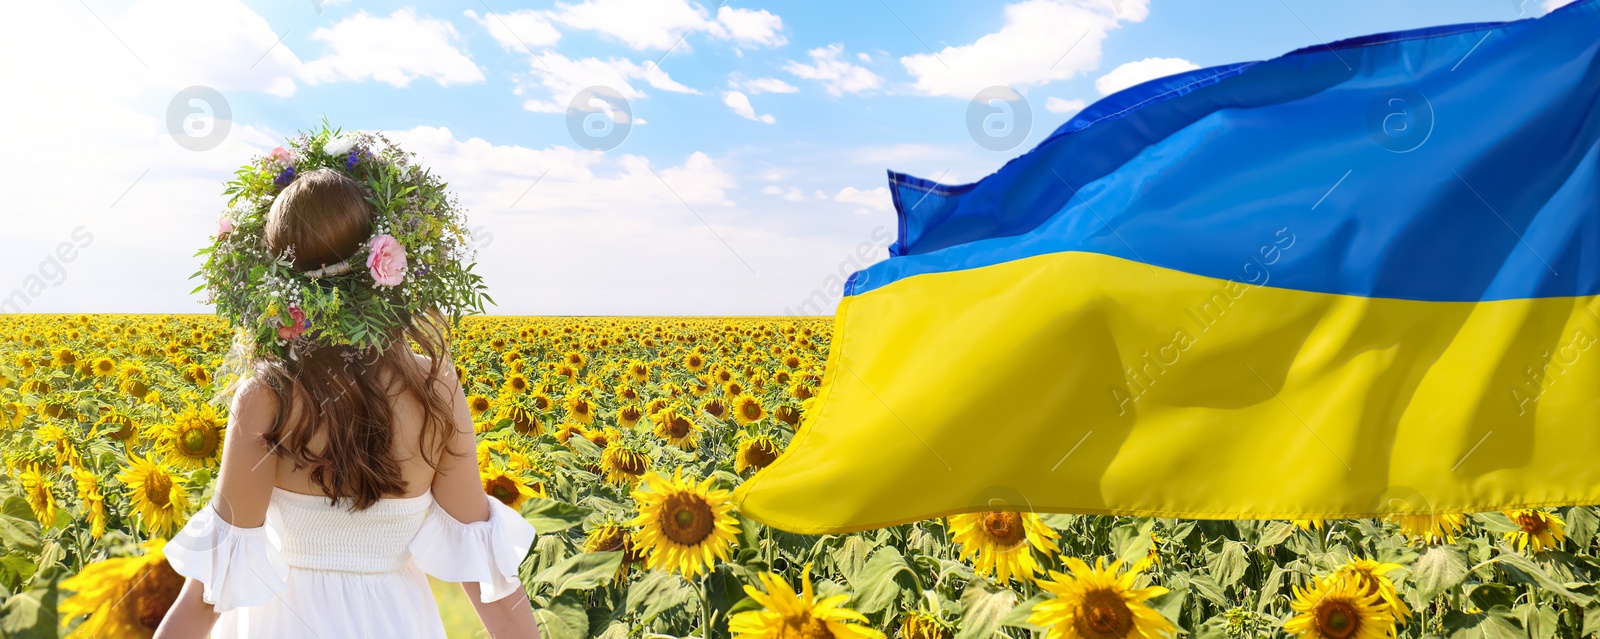 Image of Pray for Ukraine. Ukrainian flag waving near young woman with flower wreath in sunflower field on sunny day, banner design